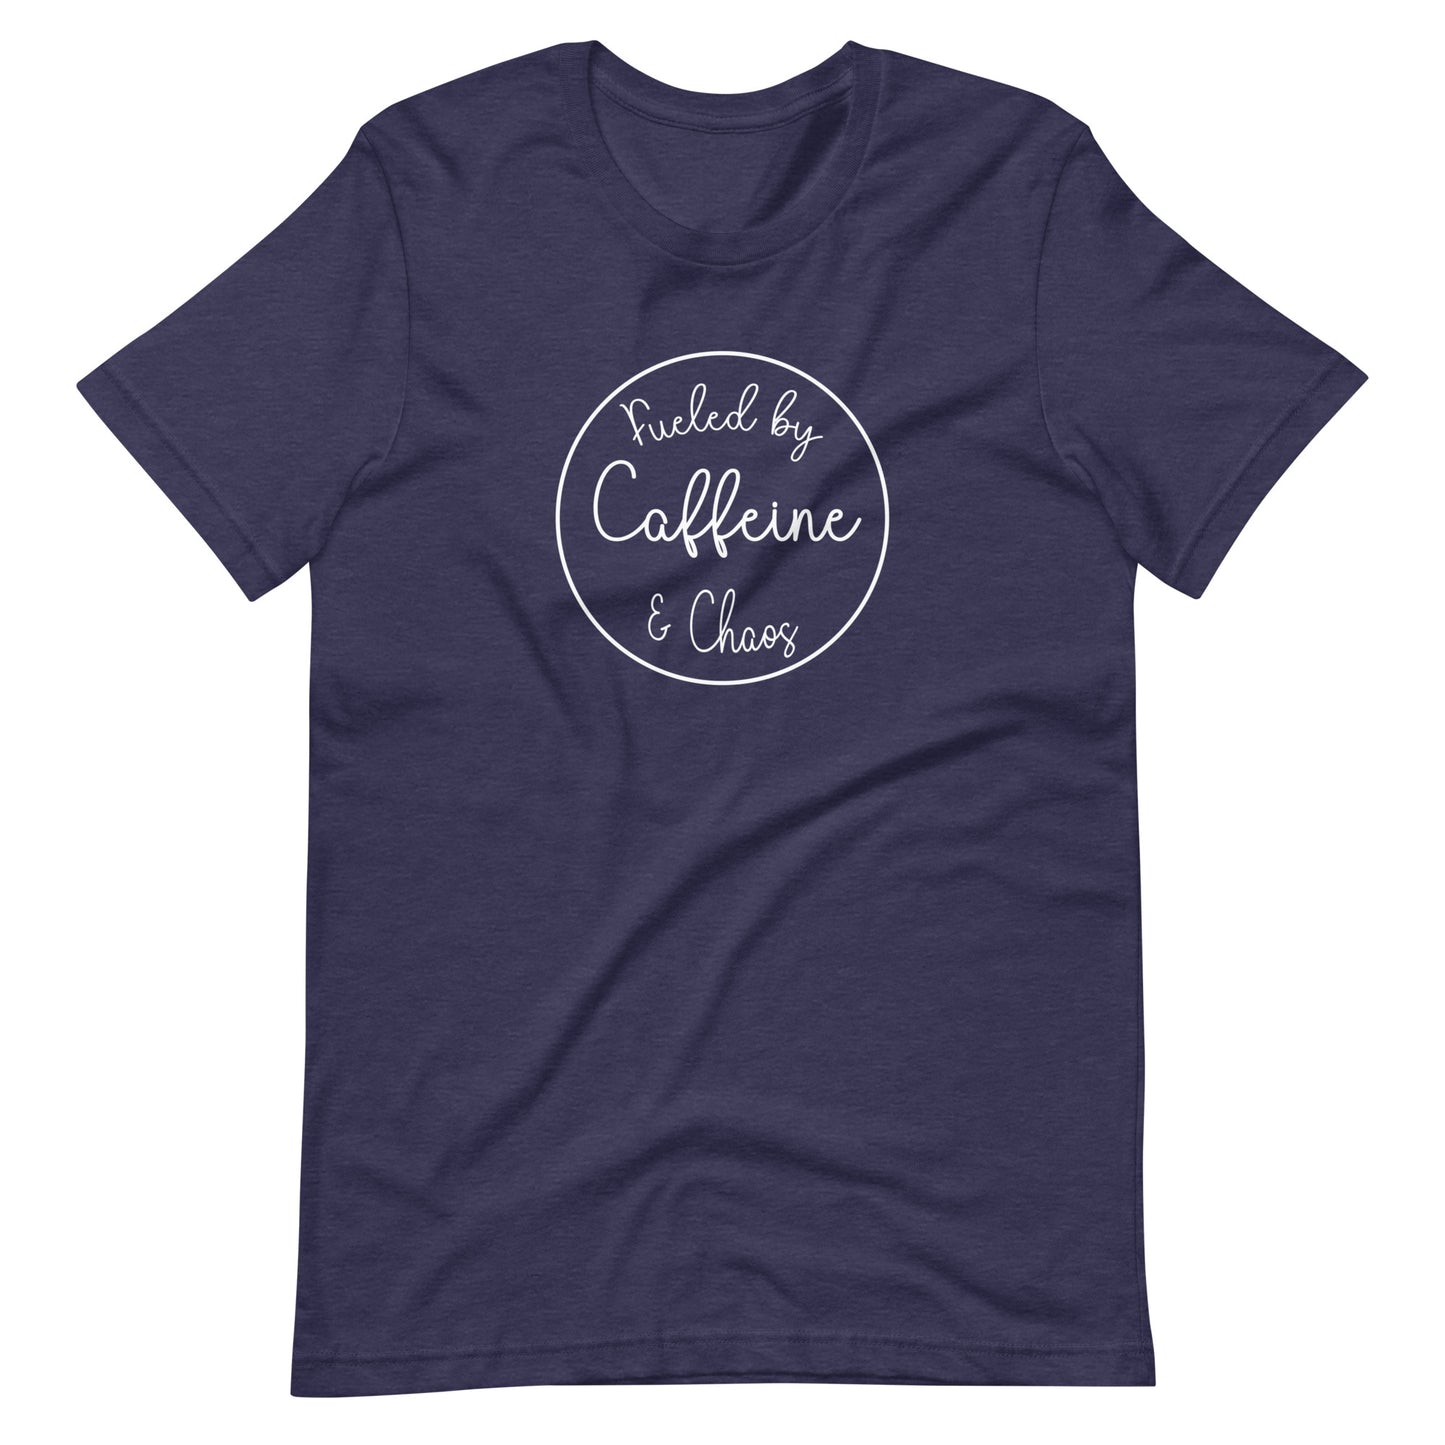 Fueled by Caffeine & Chaos unisex t-shirt